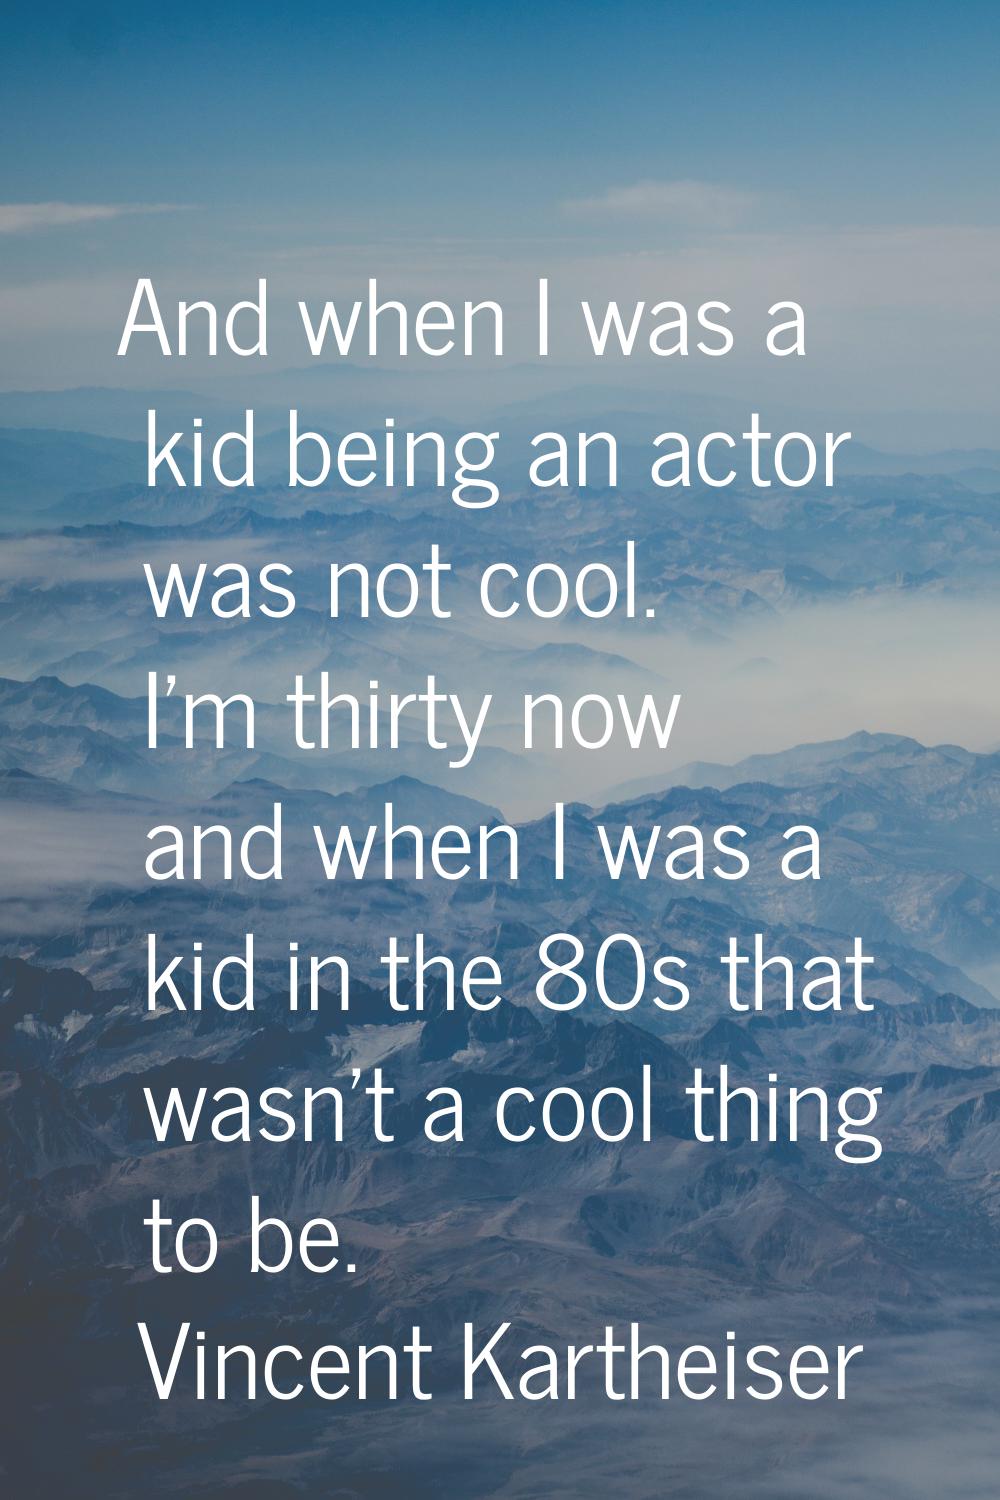 And when I was a kid being an actor was not cool. I'm thirty now and when I was a kid in the 80s th